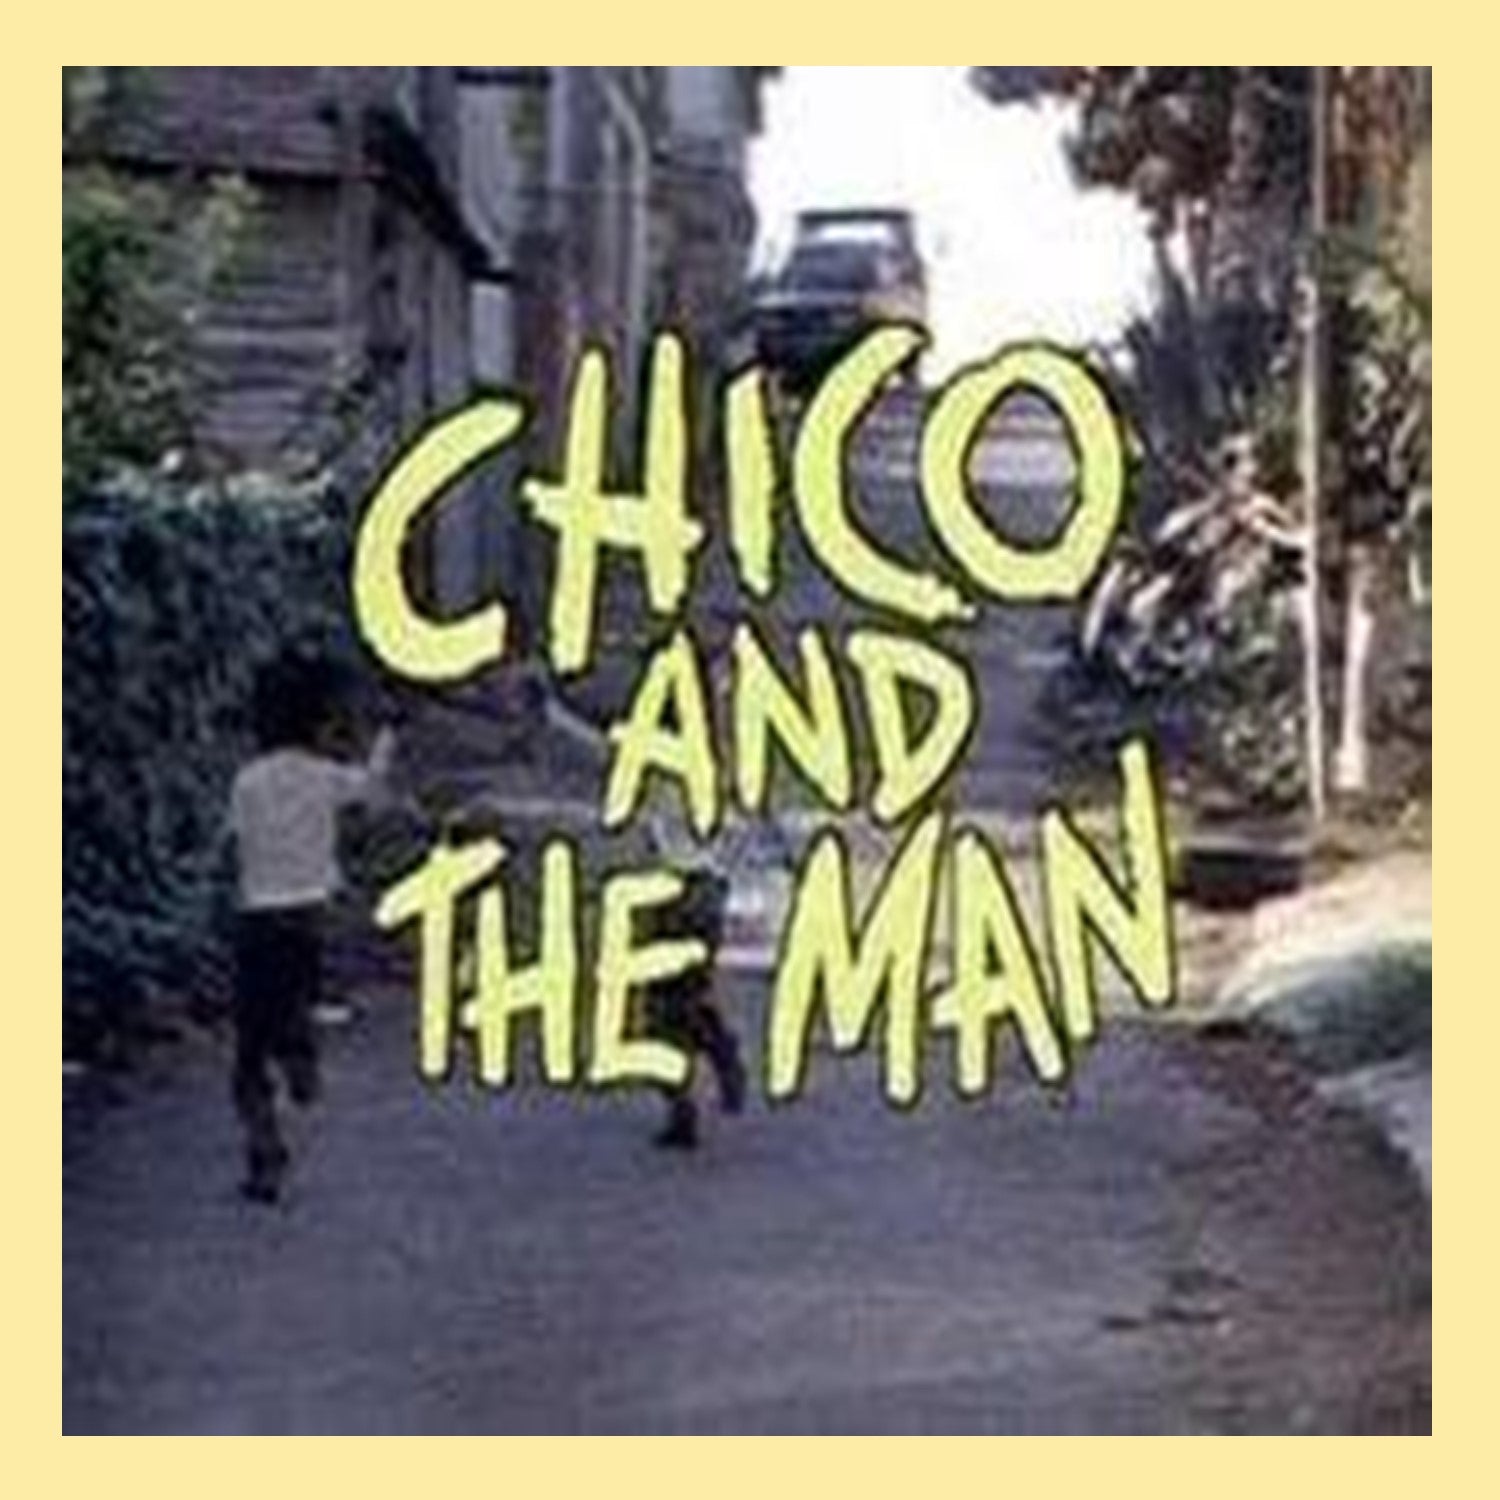 CHICO AND THE MAN - THE COMPLETE SERIES (NBC 1974-78) VERY RARE!!! Freddie Prinz, Jack Albertson, Scatman Crothers, Della Reese, Gabriel Melgar, Charo